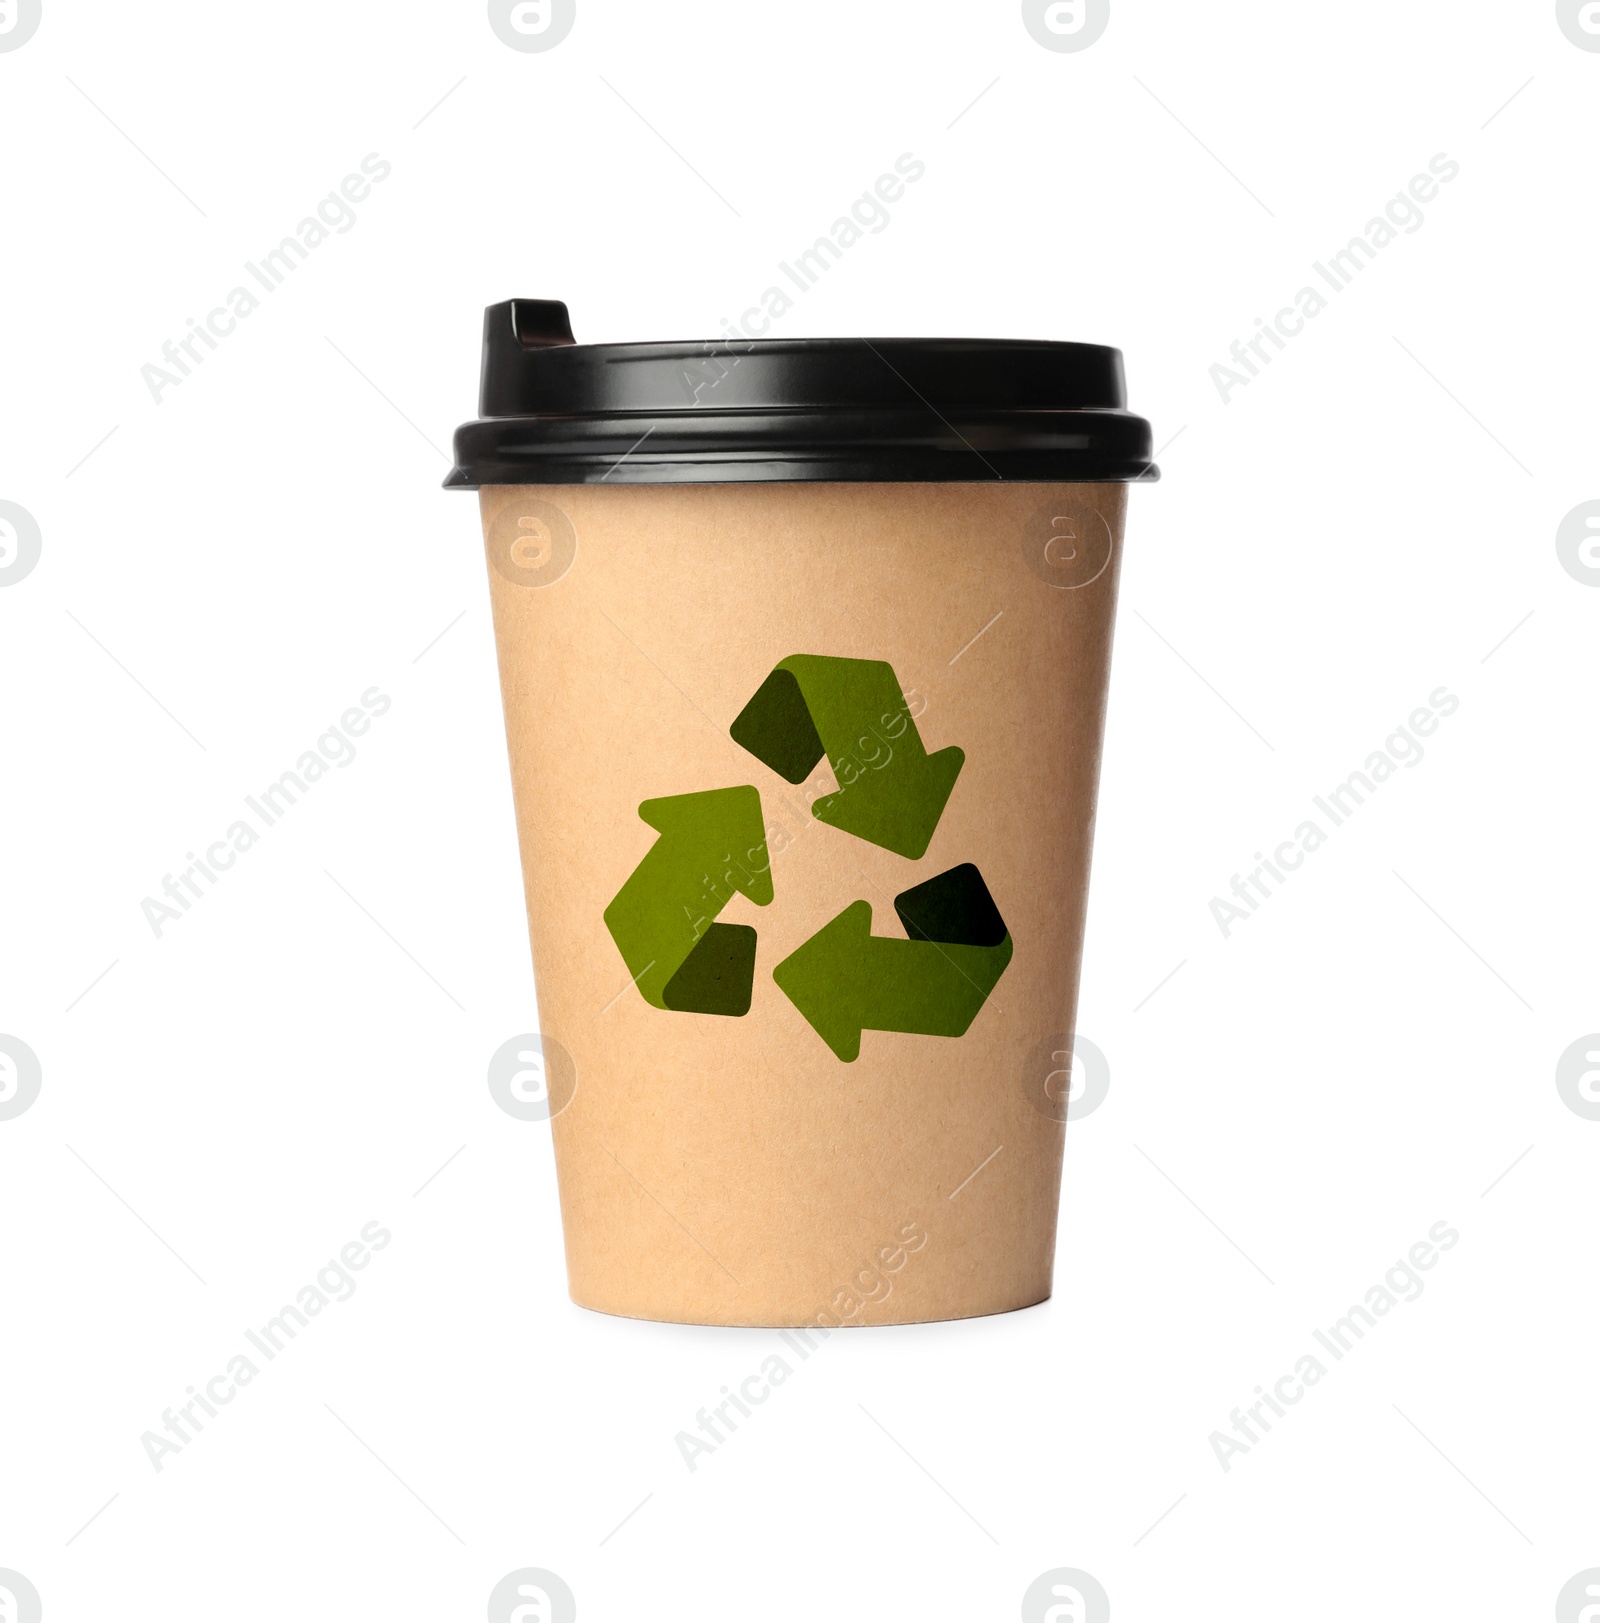 Image of Takeaway paper coffee cup with recycling symbol on white background